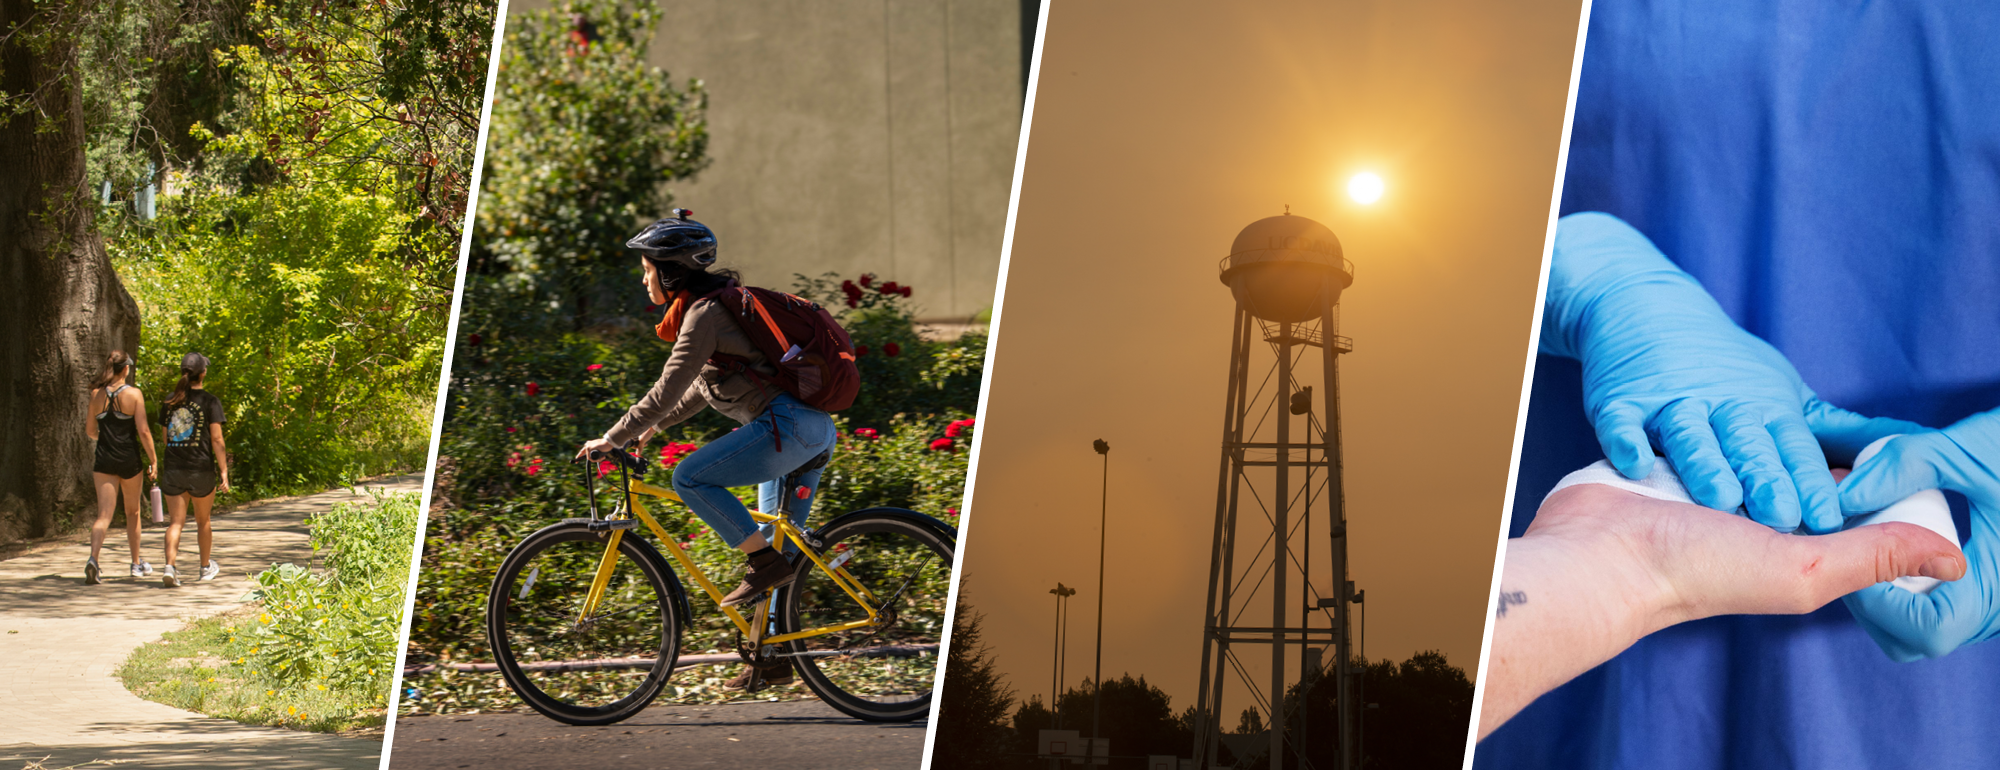 Safety Month Banner with hikers, bikers, the UC Davis water tower and a wound being dressed